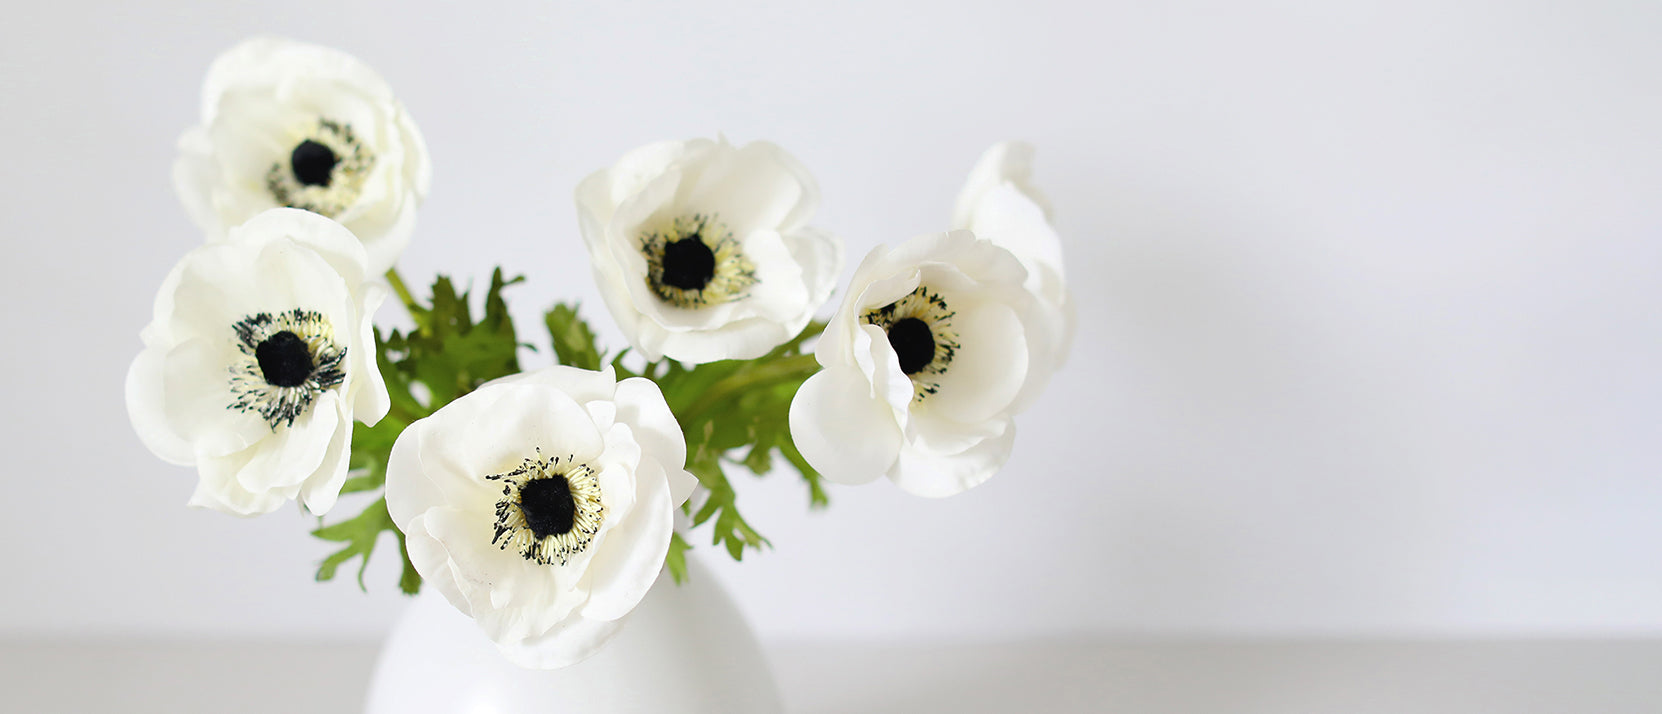 Real Touch Flowers White Anemones with Black Centers